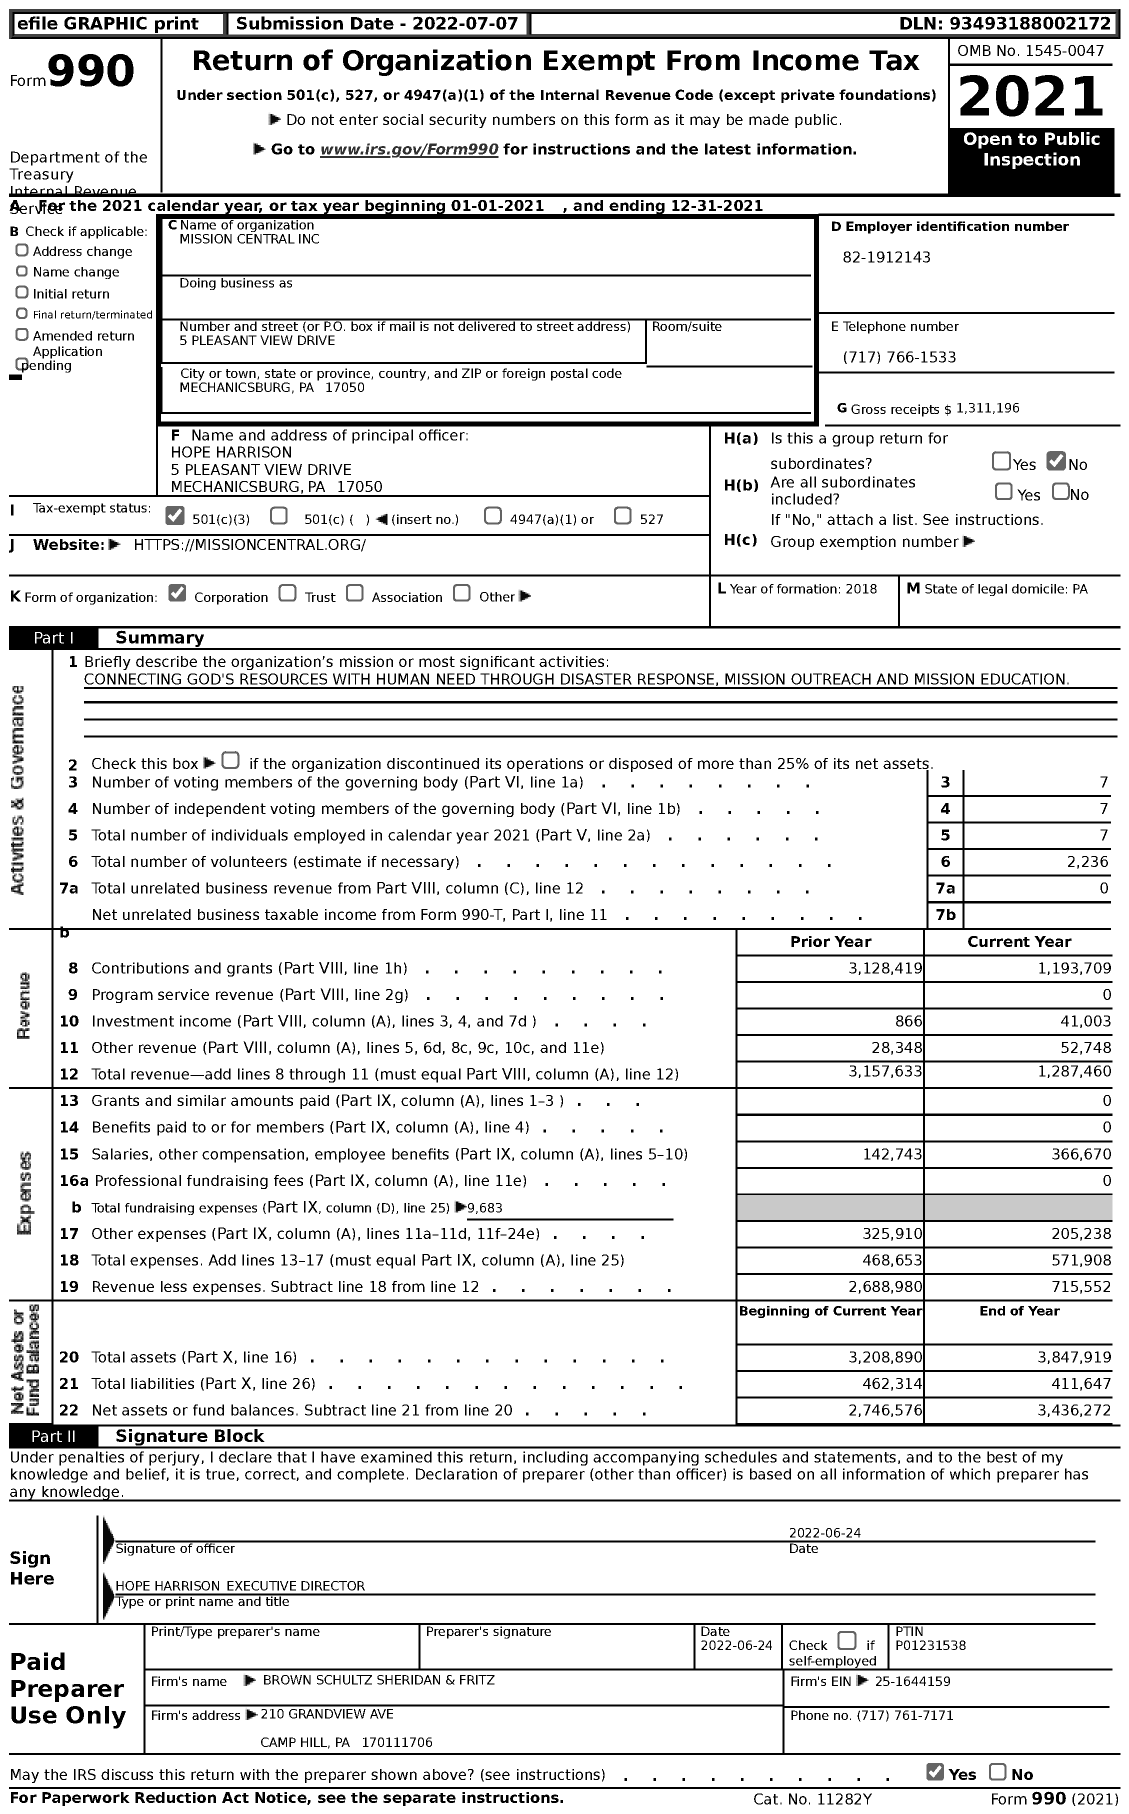 Image of first page of 2021 Form 990 for Mission Central